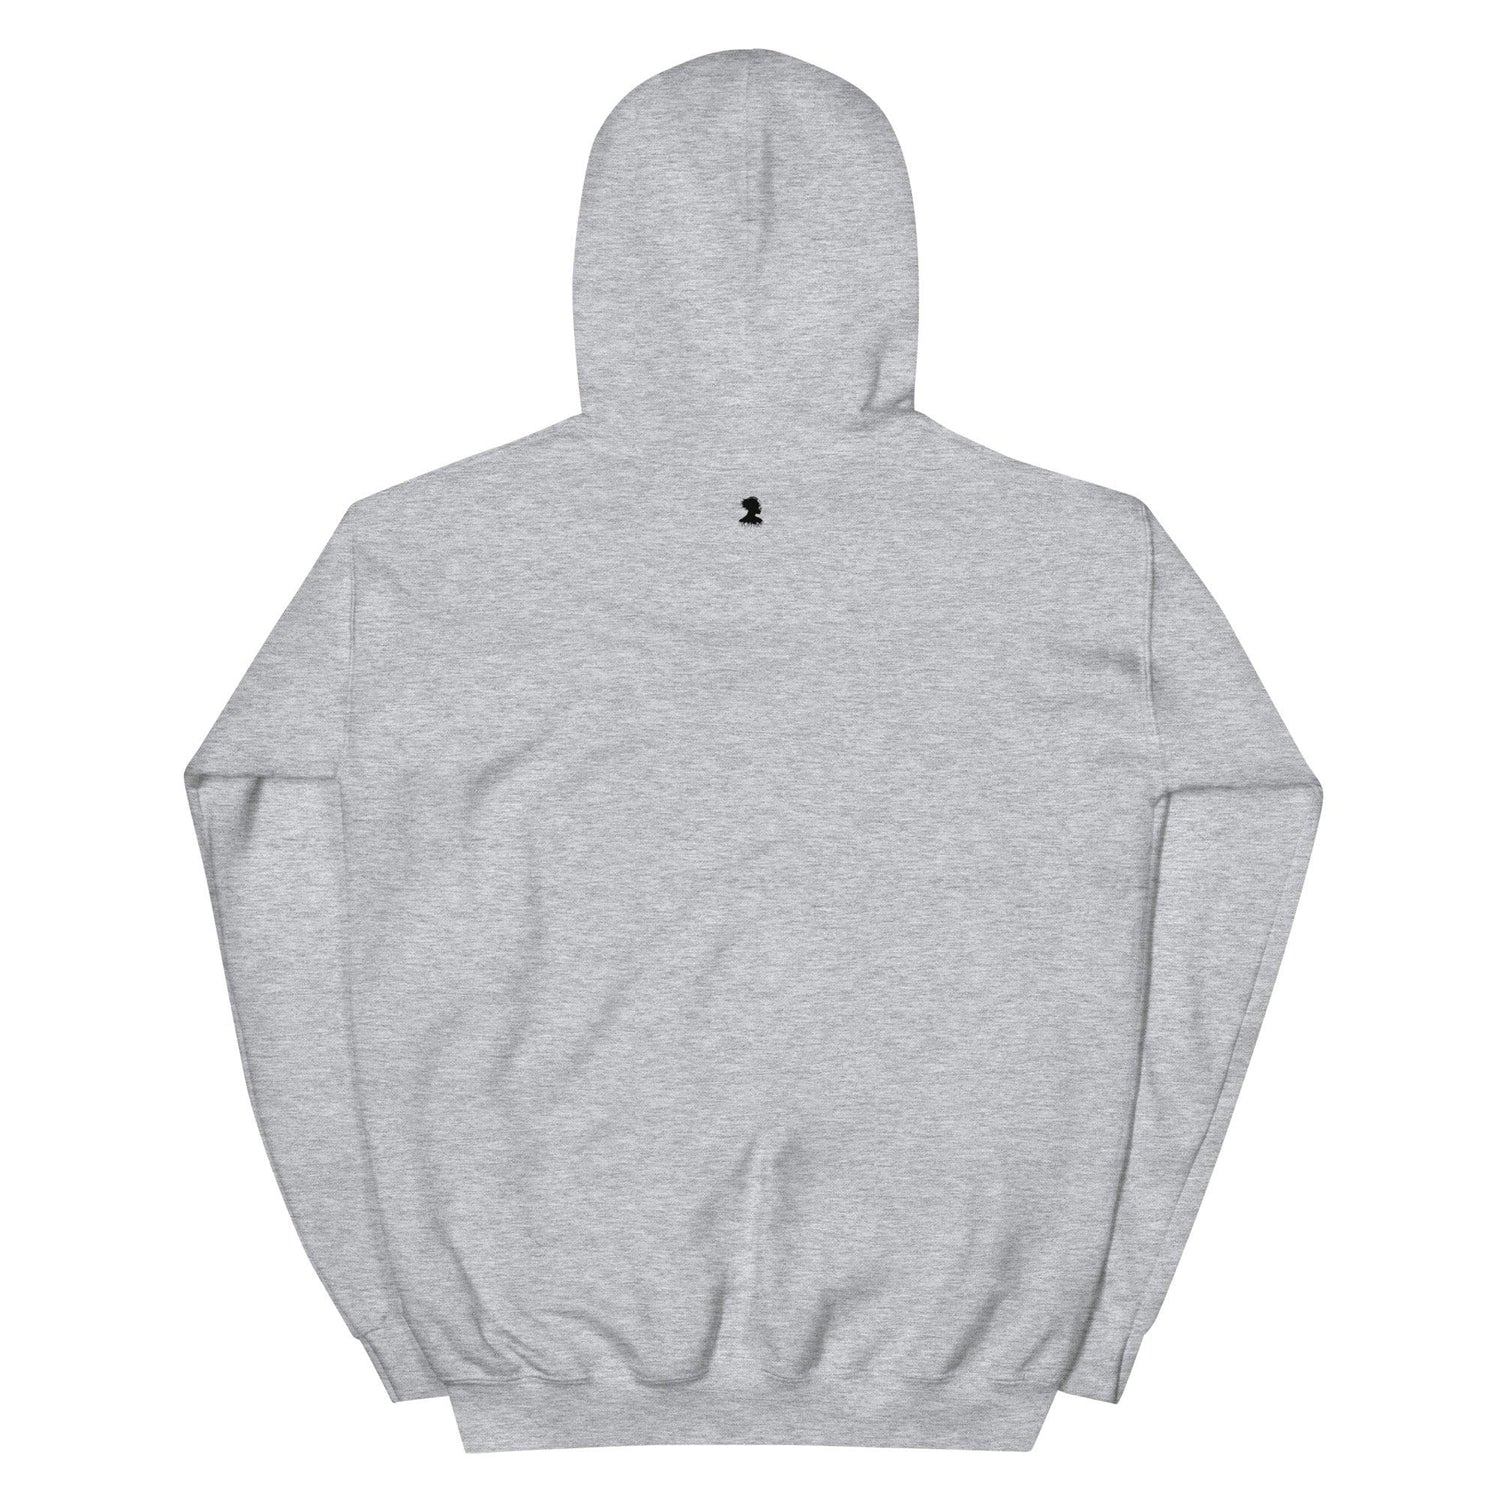 We Freed Ourselves Unisex Hoodie - White Letters. 9 colors. S-5X - Vienna Carroll